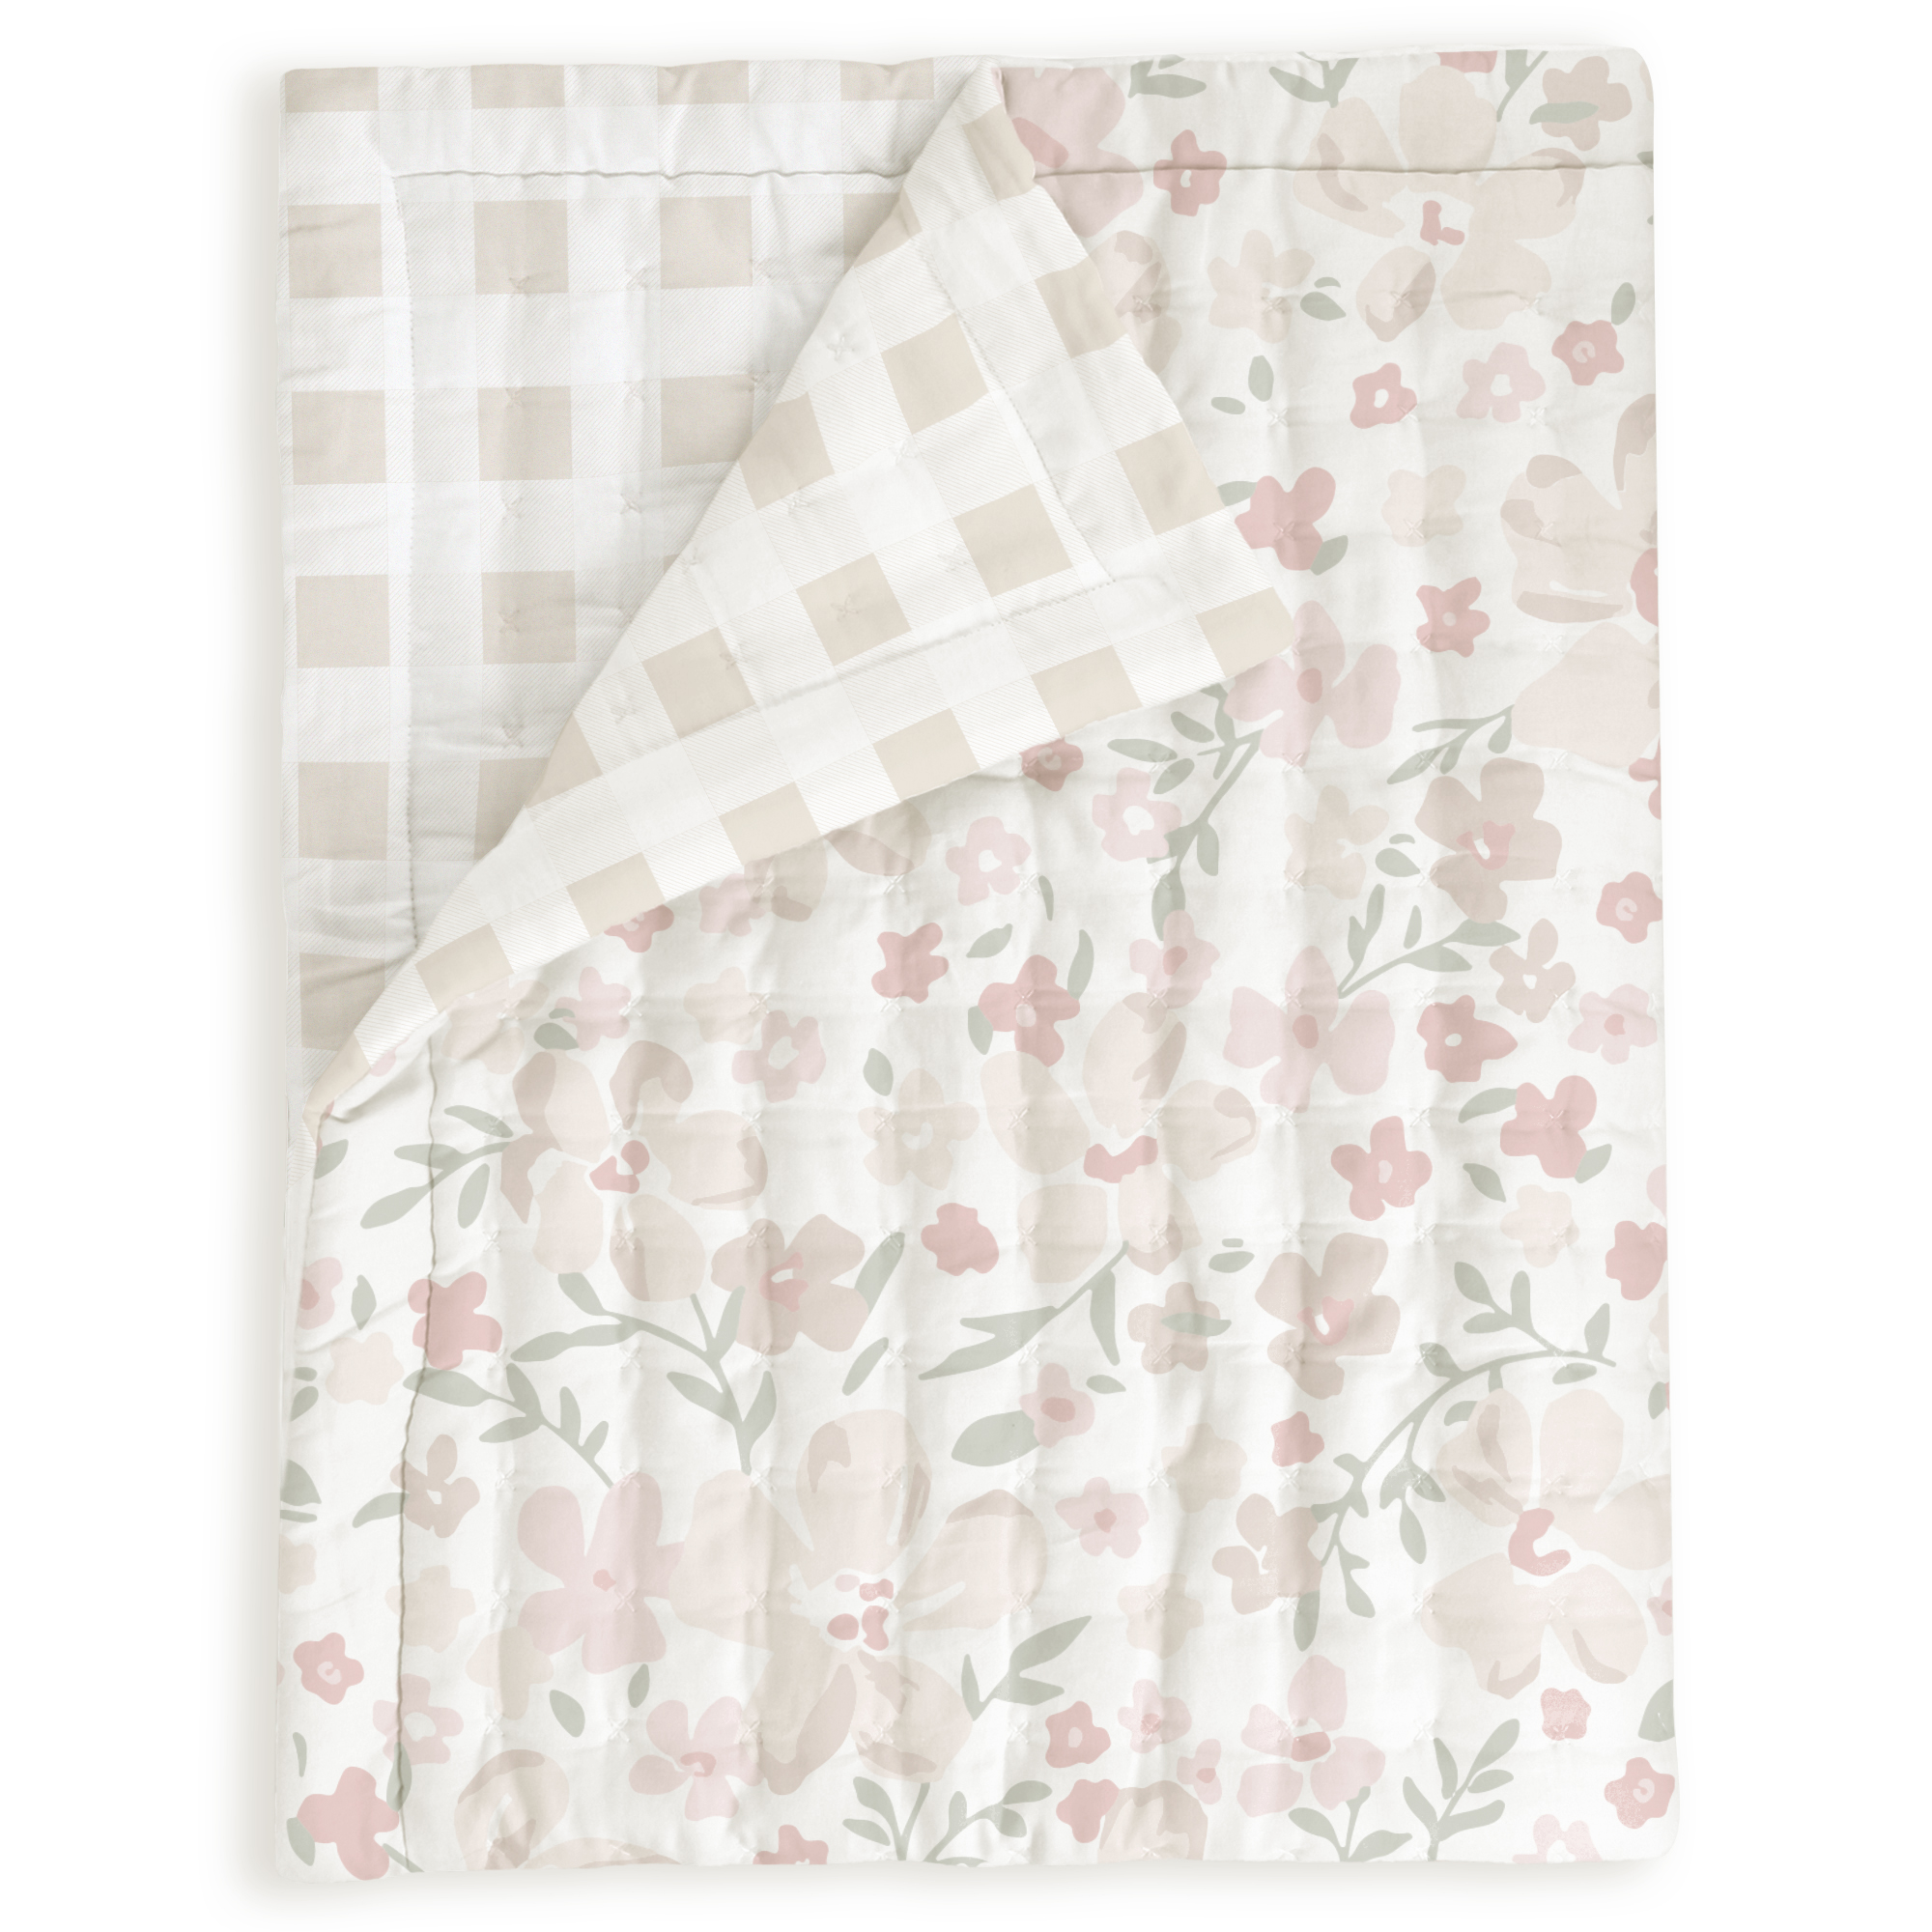 A neatly folded Organic Cotton Comforter - Blossom & Plaid from Makemake Organics featuring a floral pattern with pink flowers and green leaves on a white background, partially covered by a plaid throw blanket in muted tones.